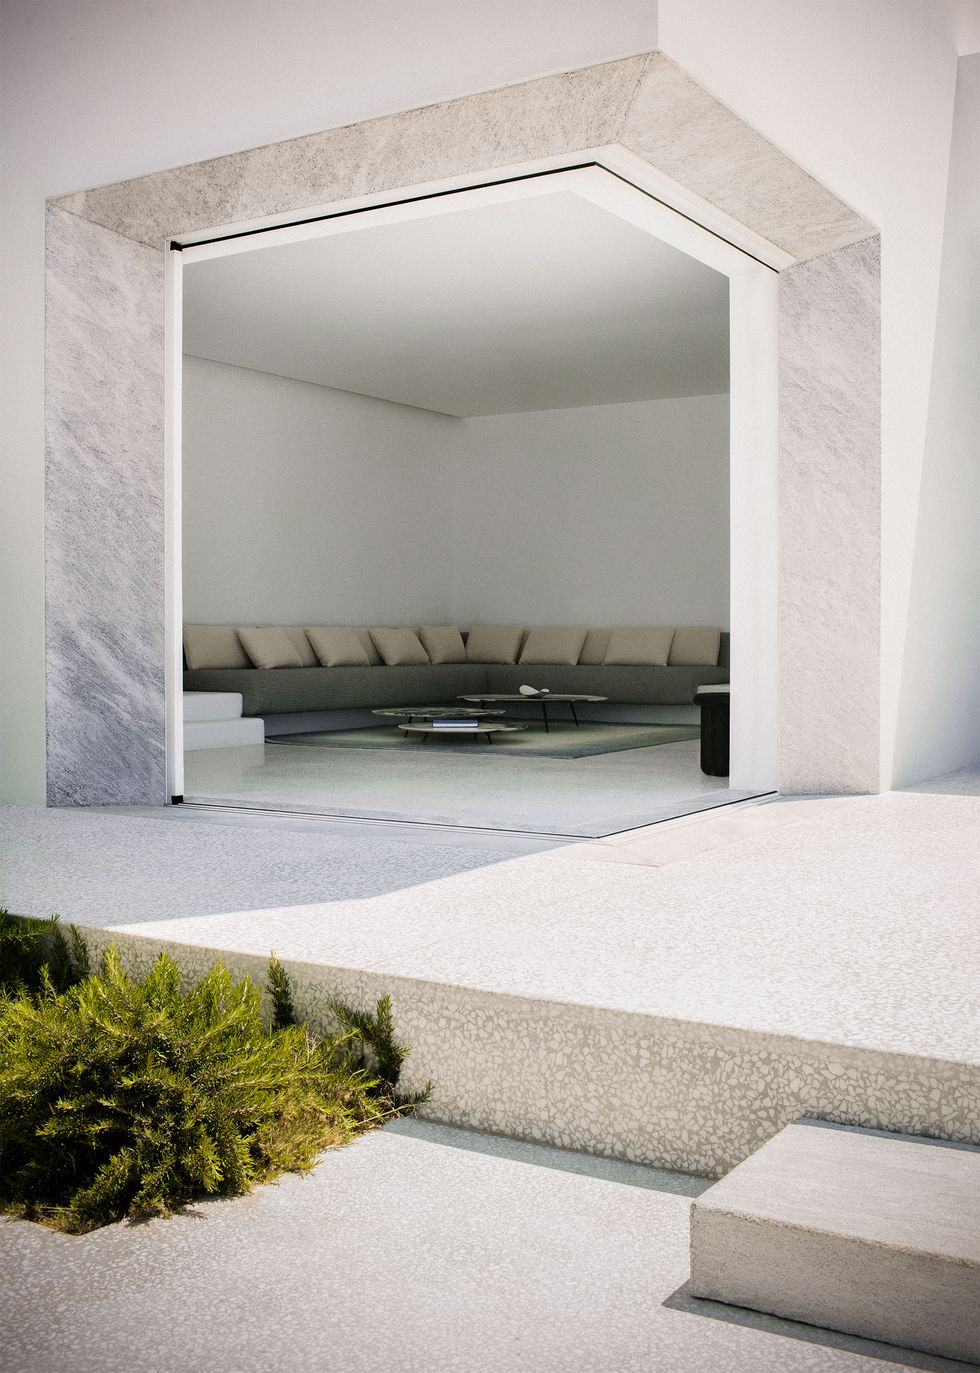 from the exterior, a single step up onto the terrace leads to an indoor living room with a large built in l shaped sofa with cushioned seats and backs and pillows and three low cocktail tables of varying sizes